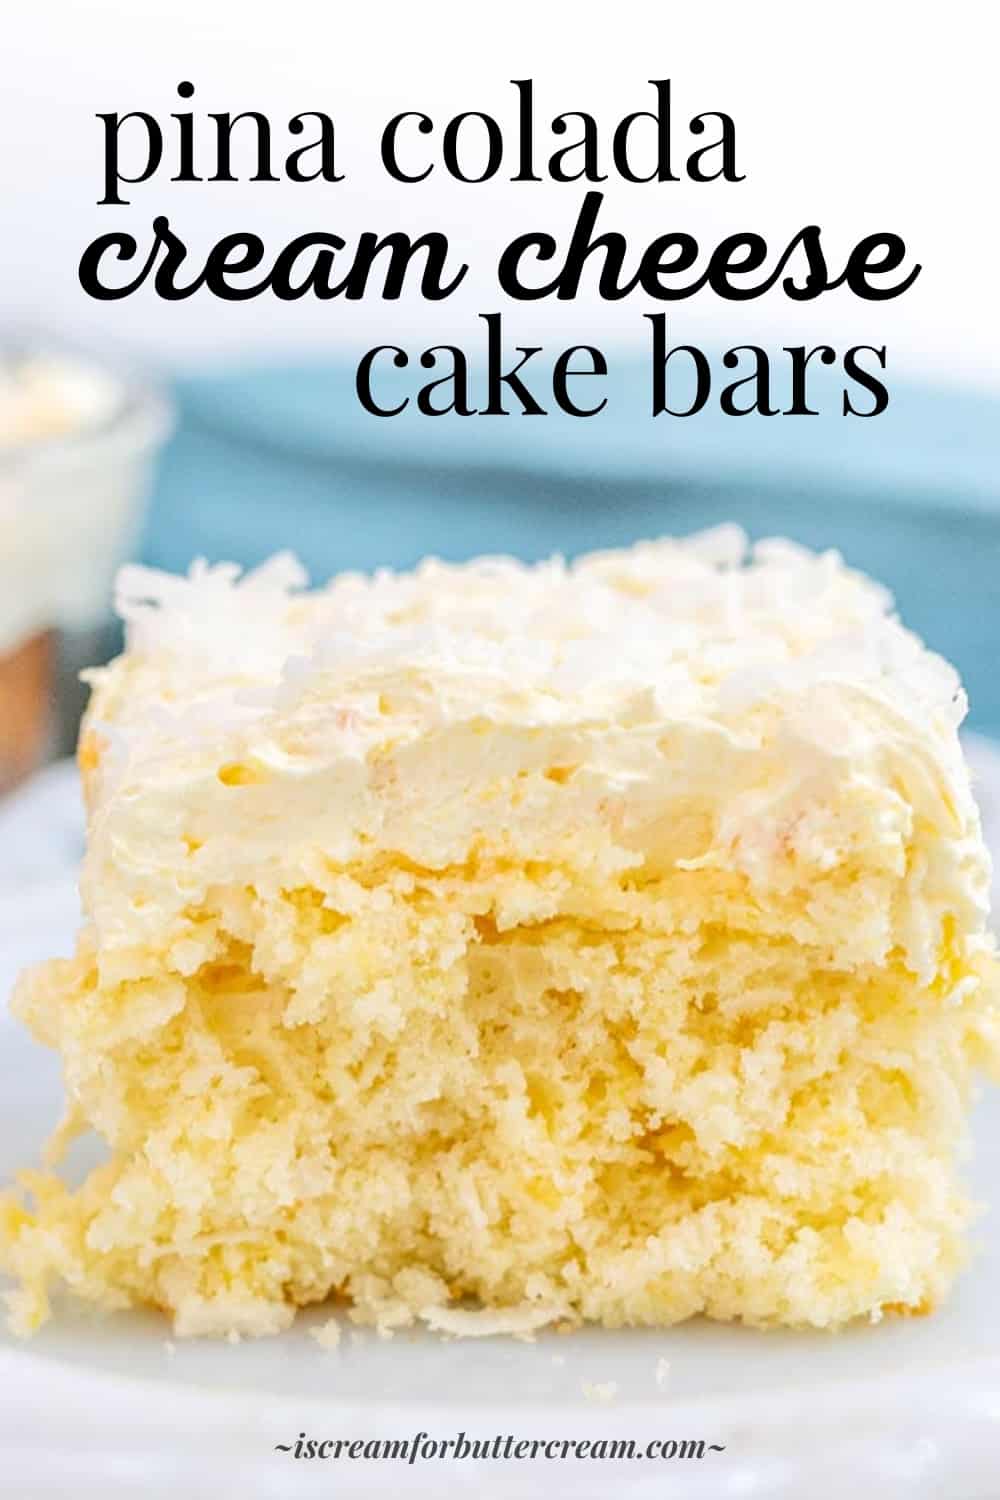 Large close up of pina colada cake bars with text overlay for pinterest.